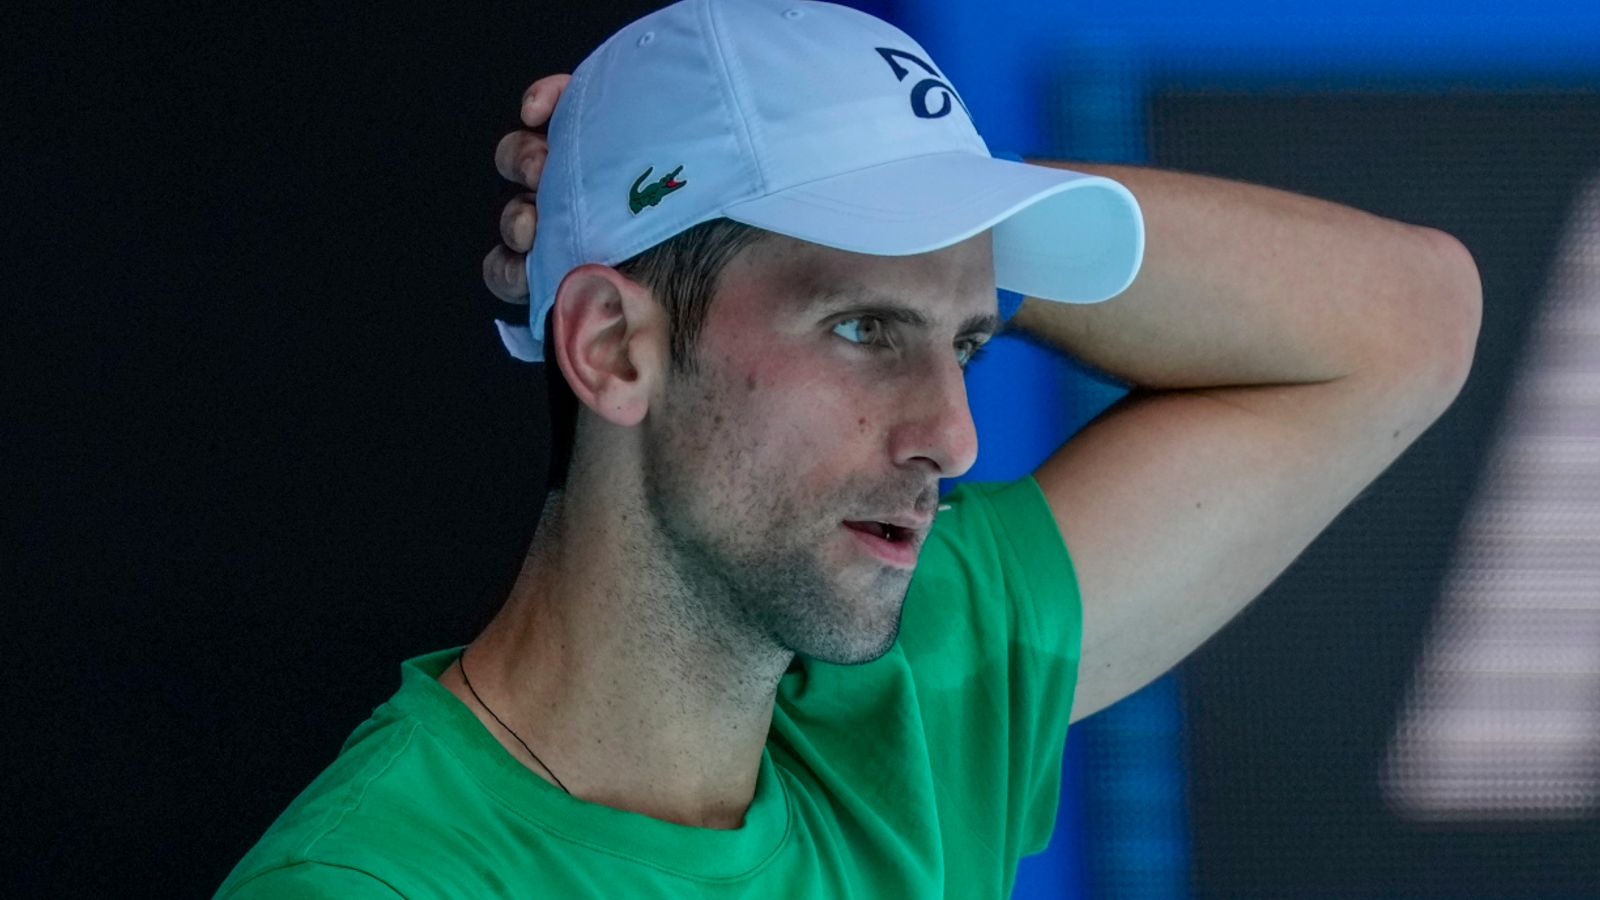 Novak Djokovic set to be deported from Australia after losing second visa appeal hearing